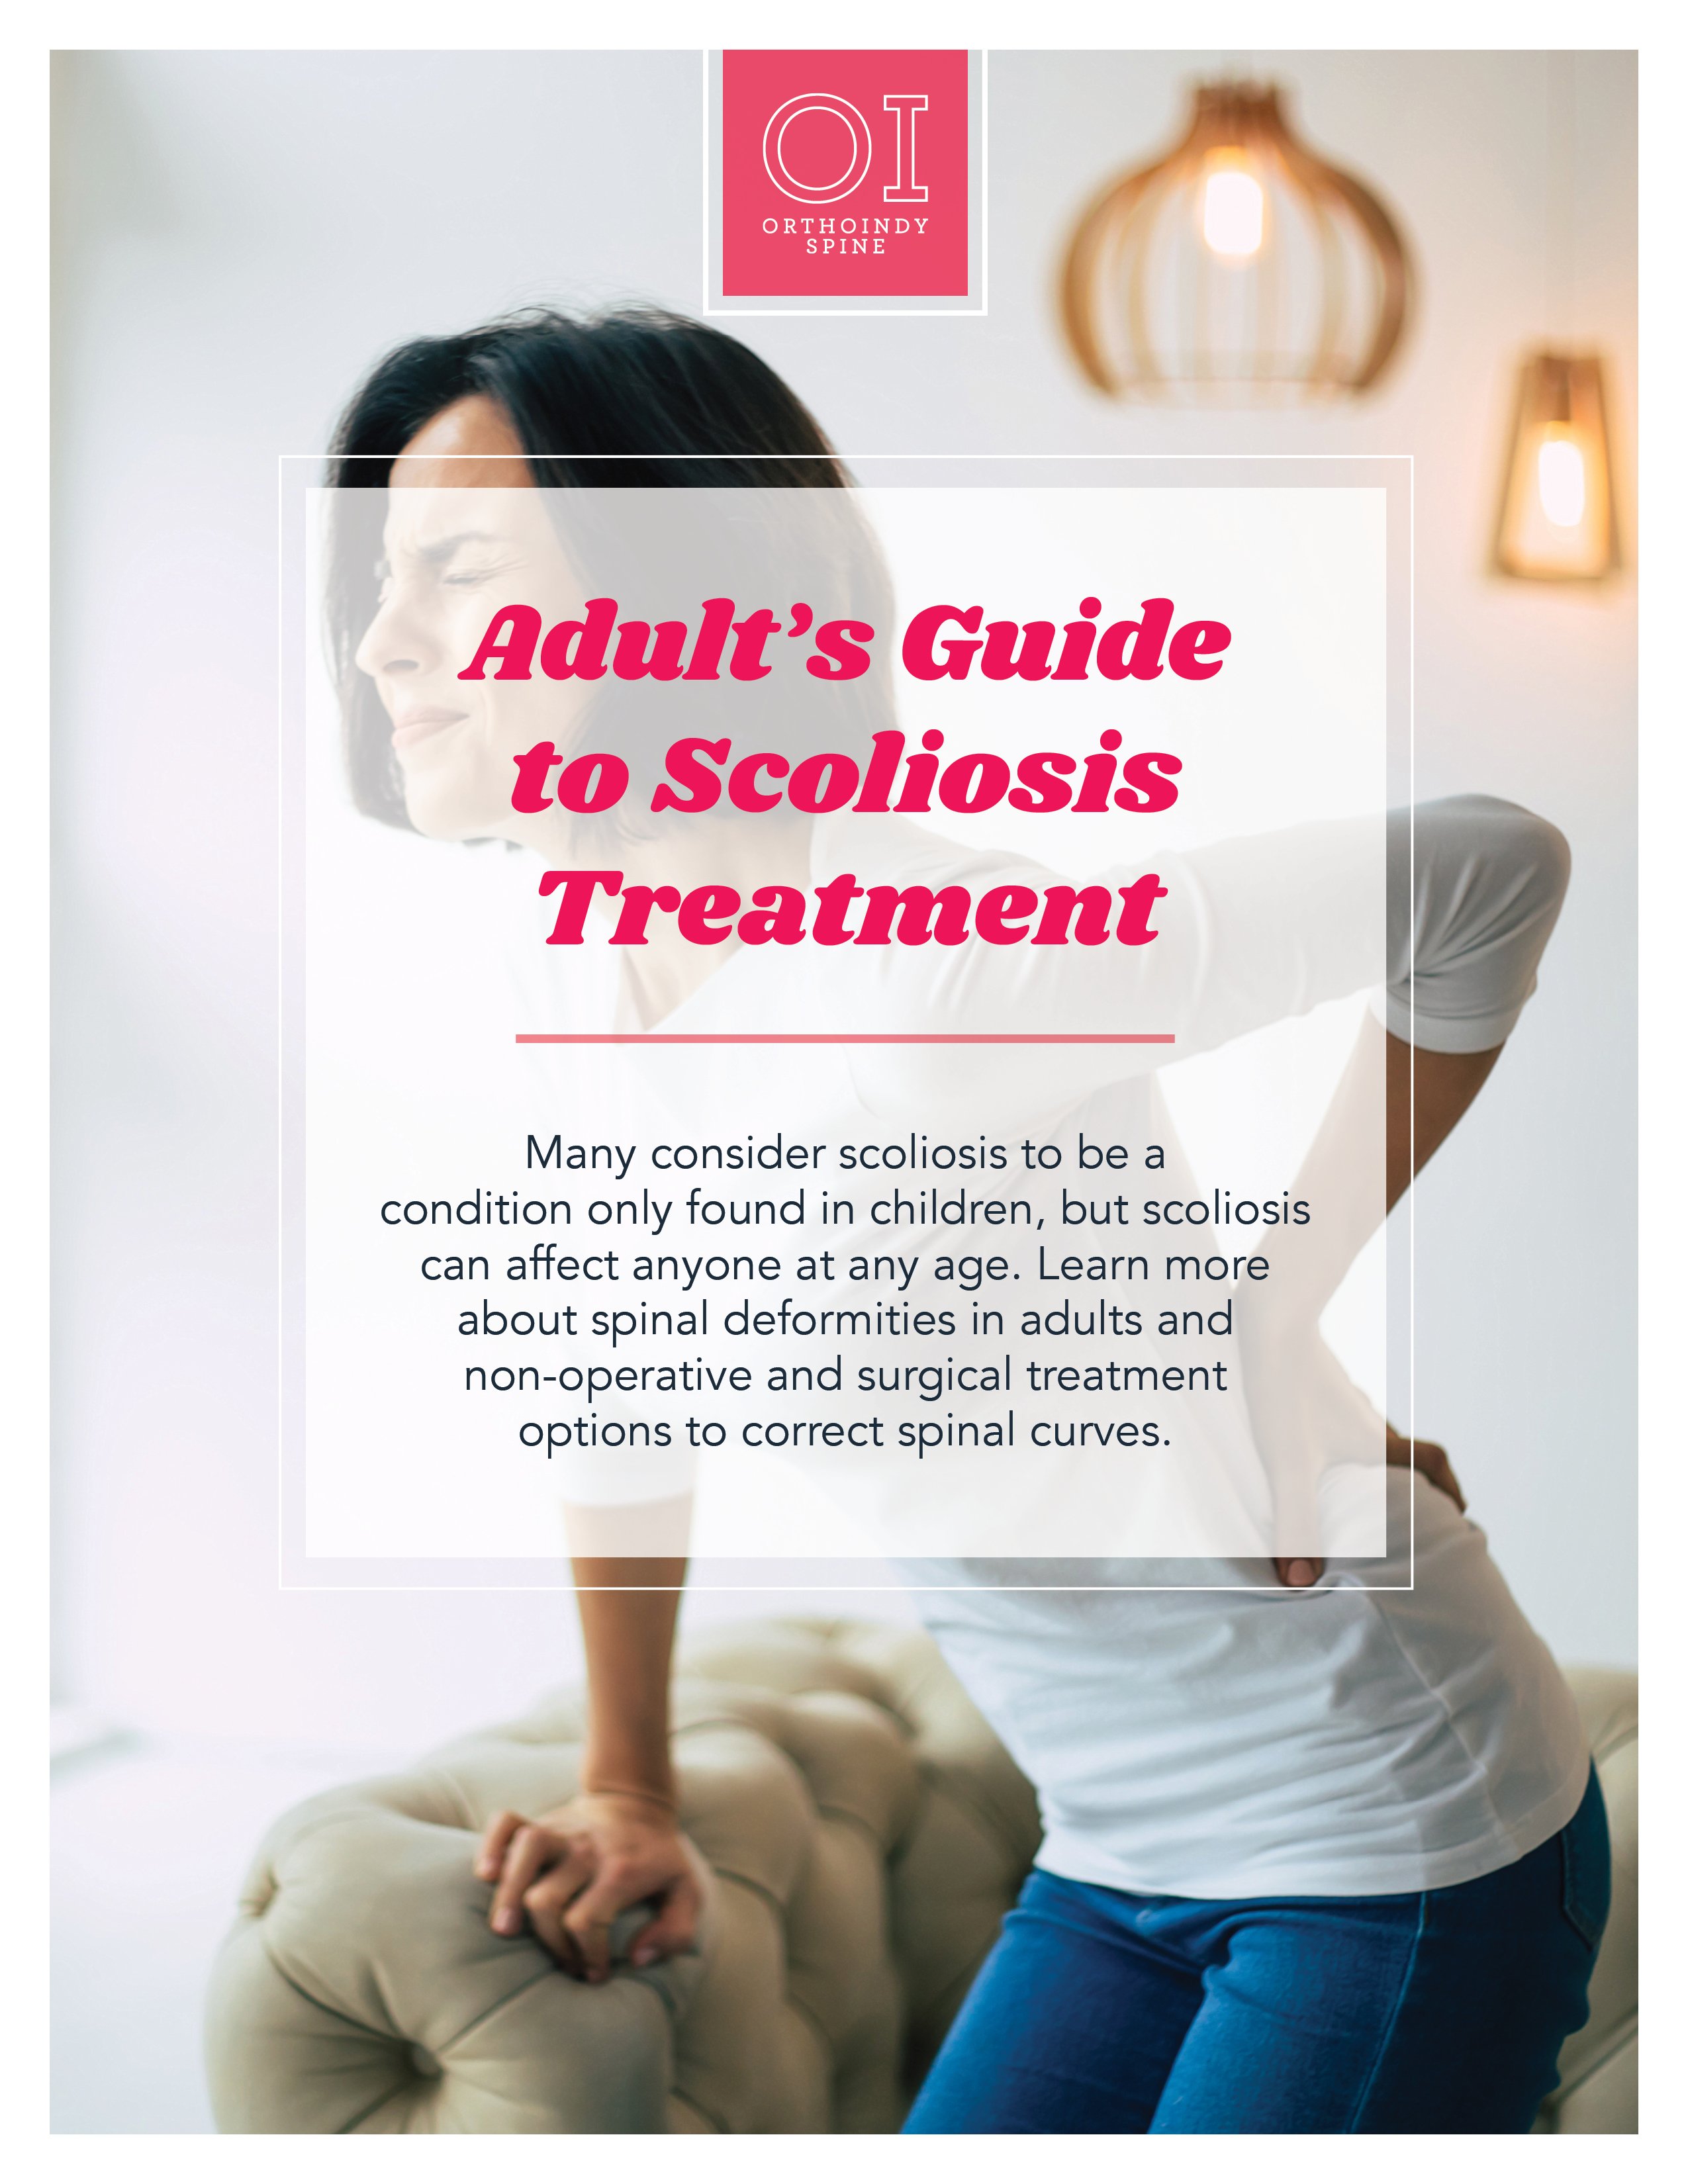 Adult’s Guide to Scoliosis Treatment